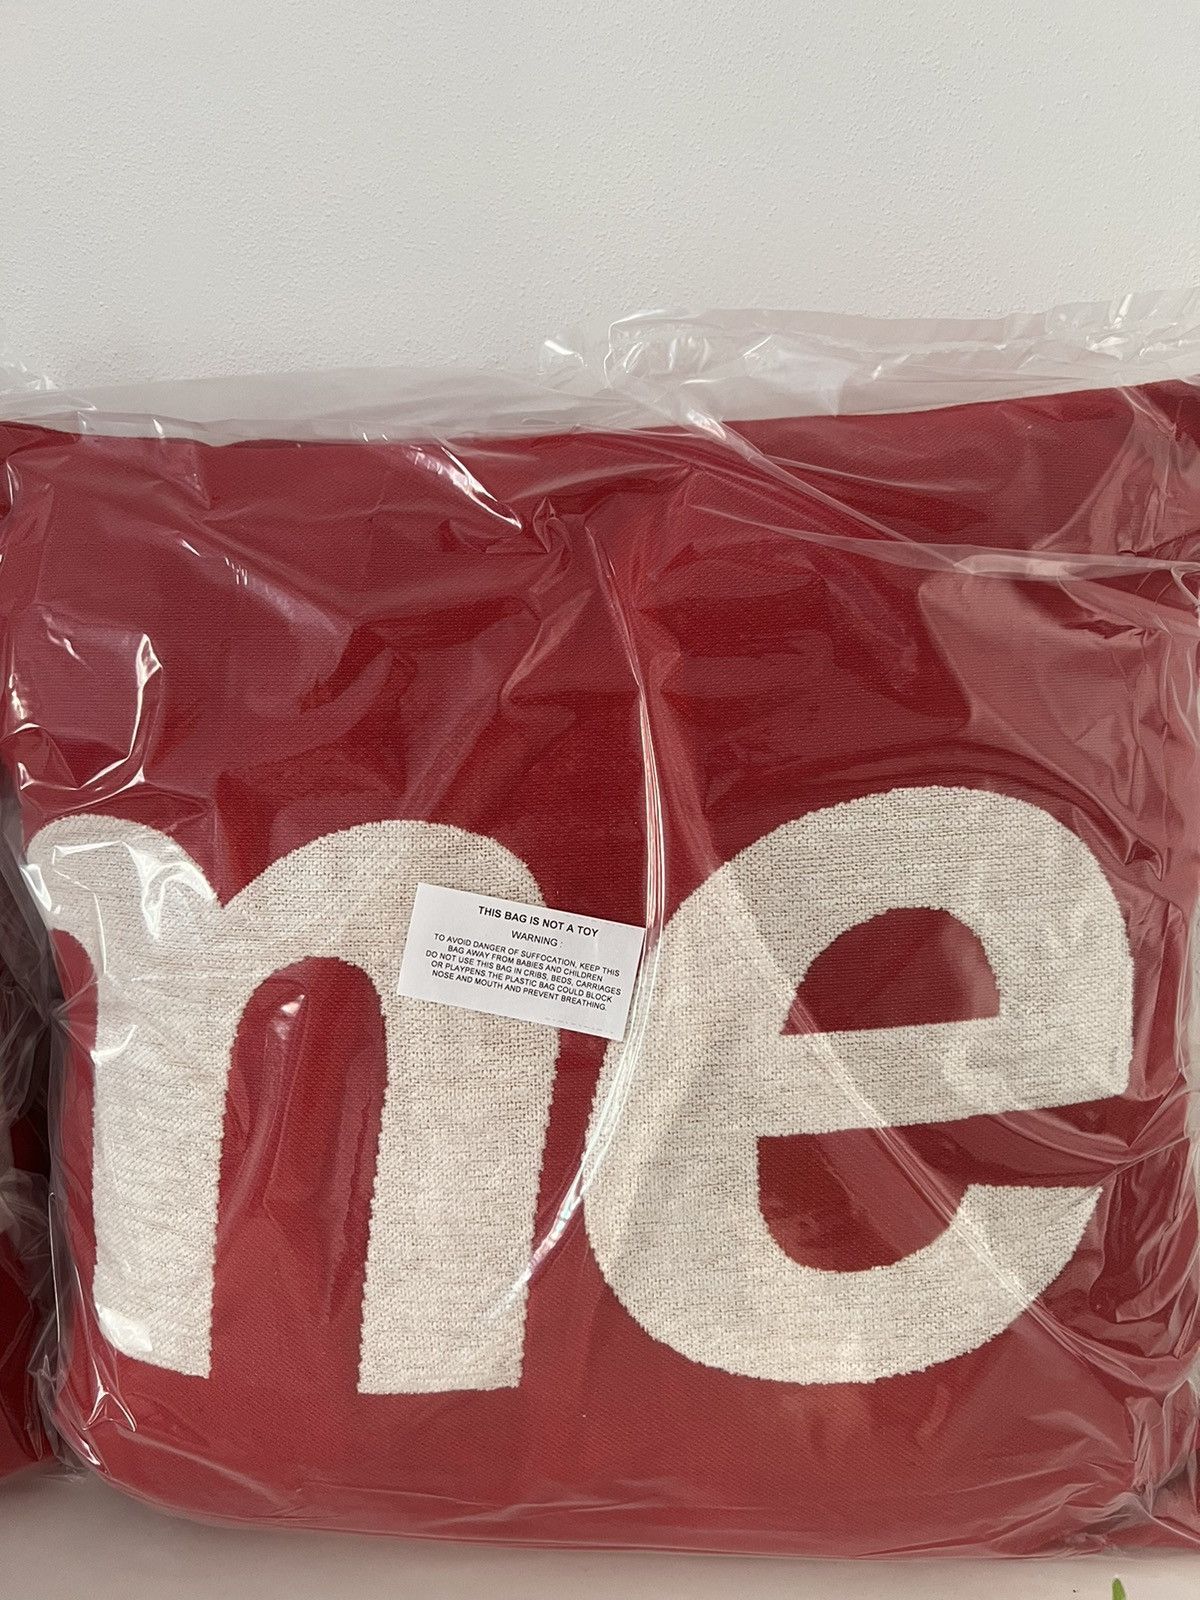 Supreme Supreme®/Jules Pansu Pillows (Set of 3) Style: Red | Grailed